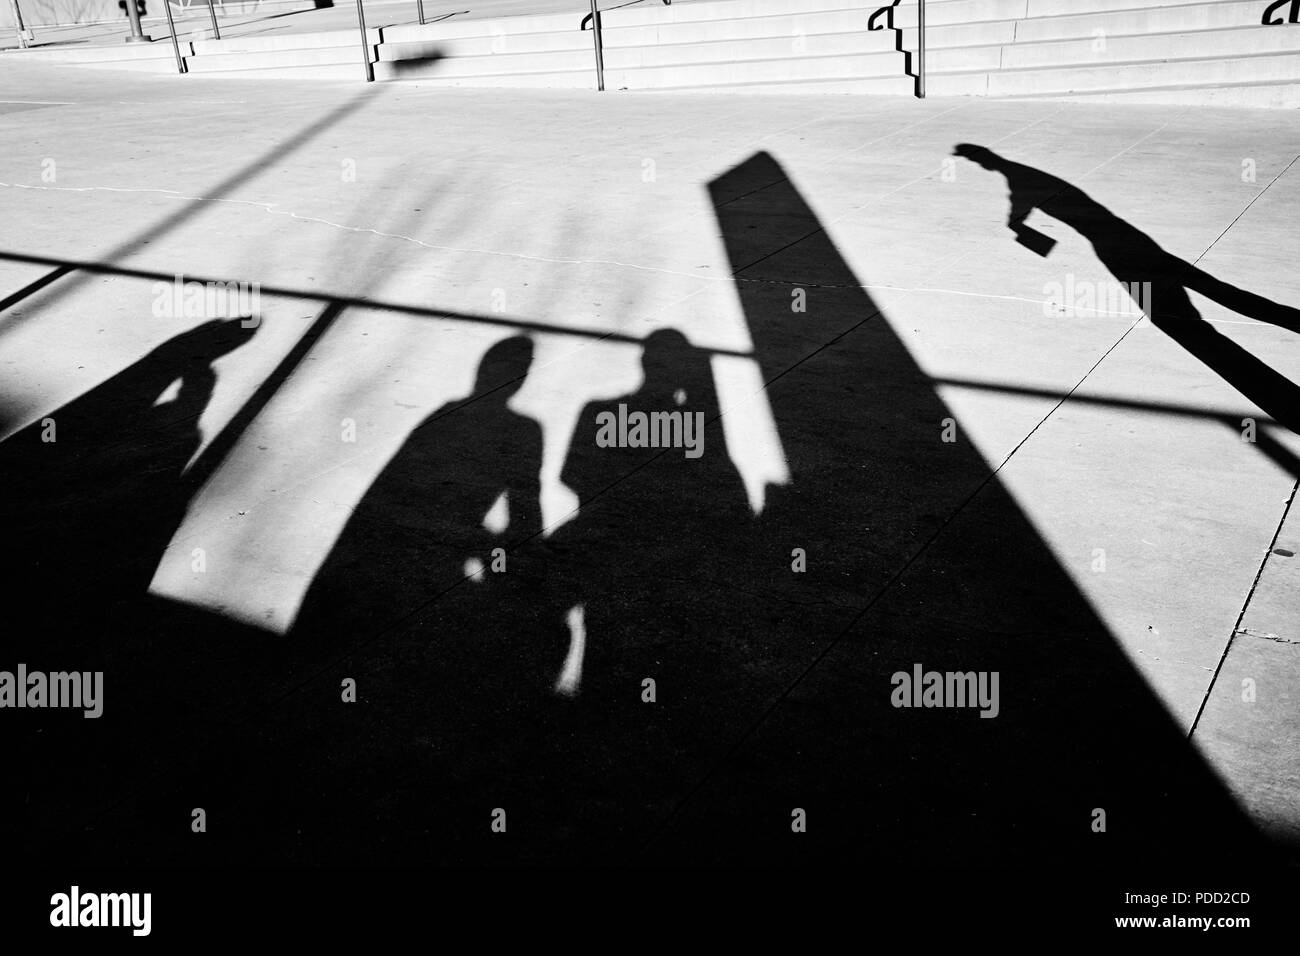 People silhouettes on a pavement, black and white street photo. Stock Photo